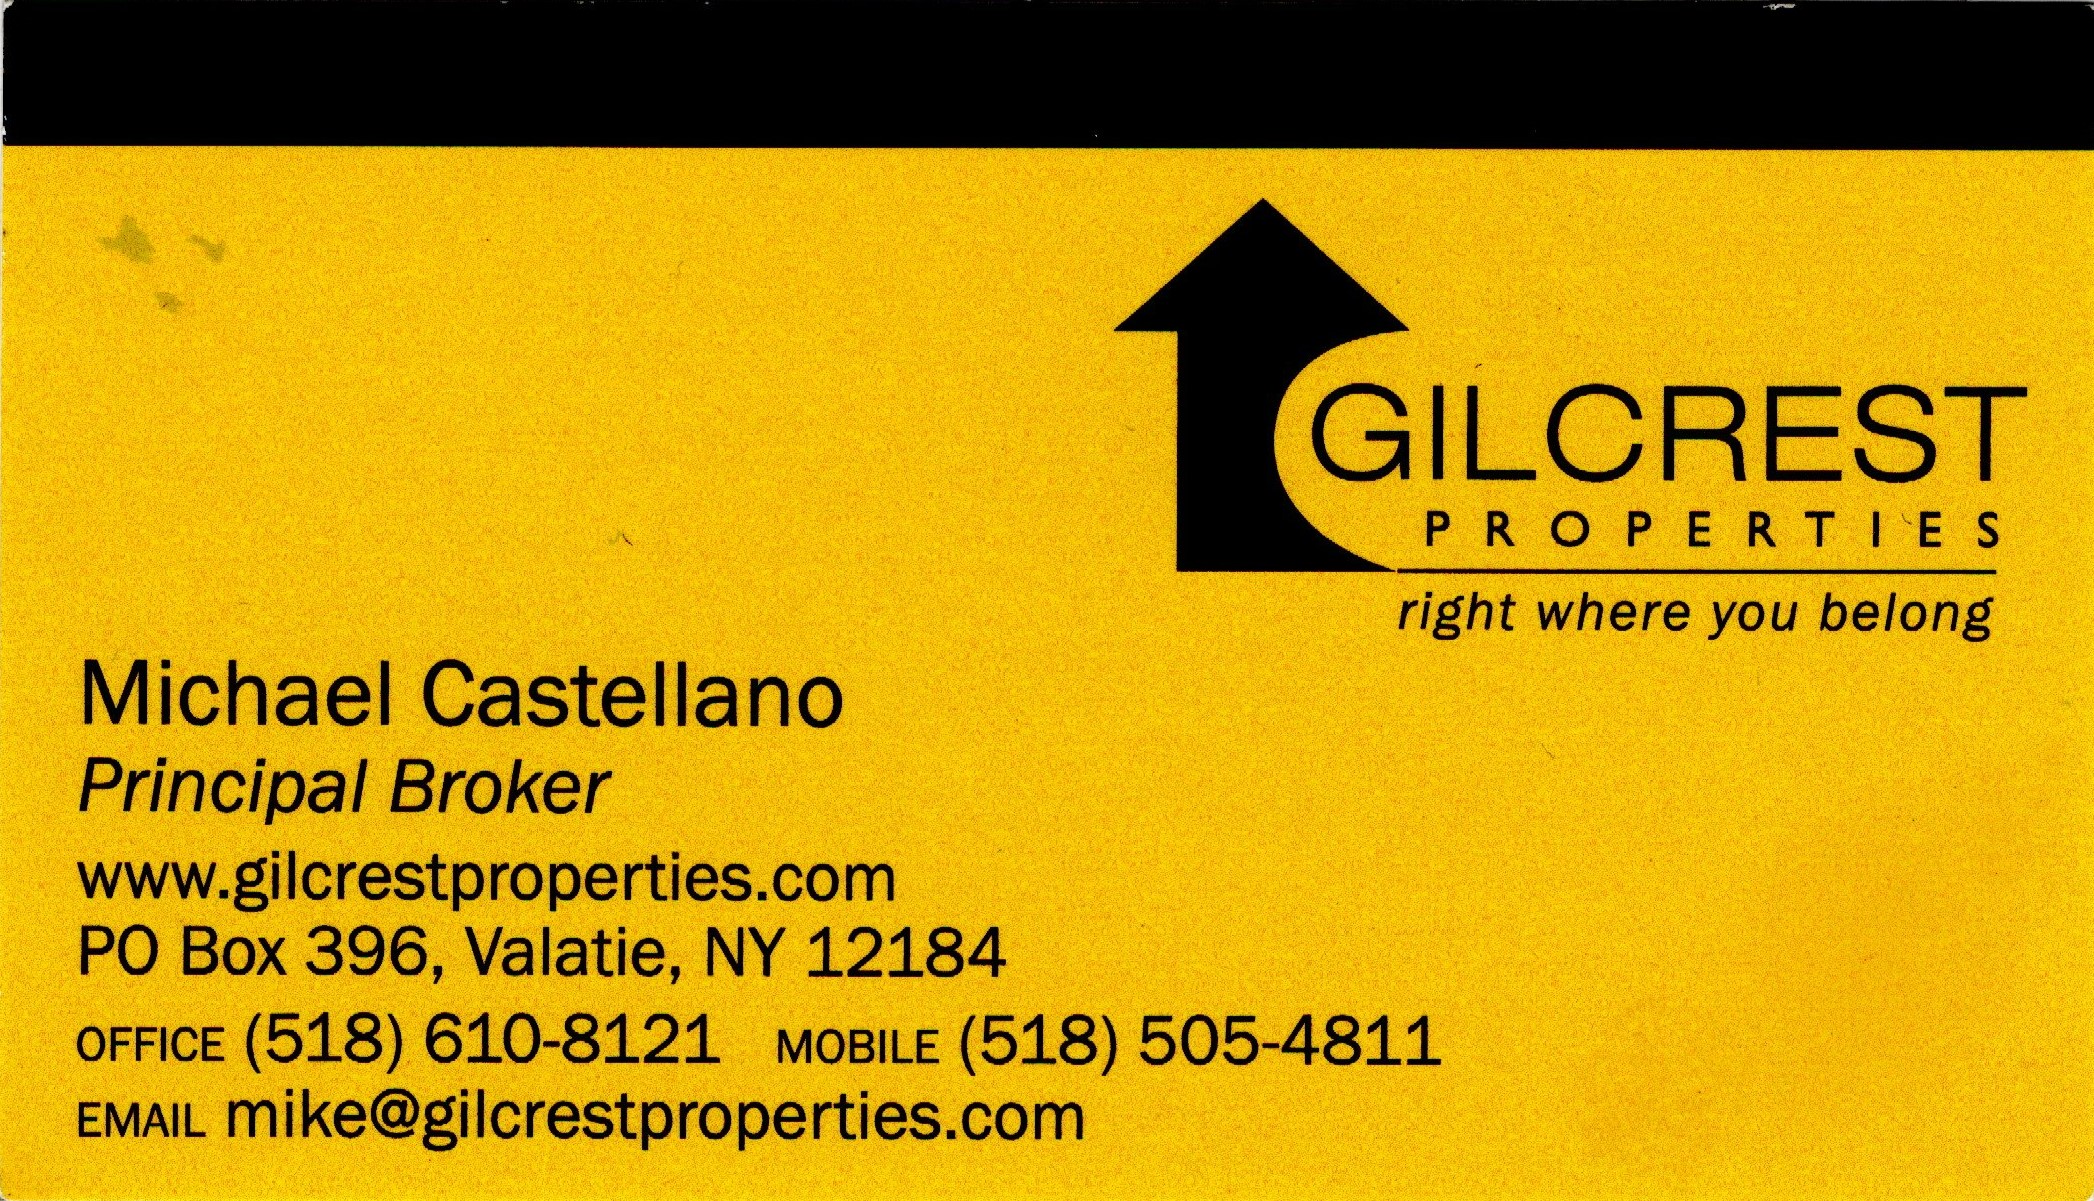 gilcrest properties